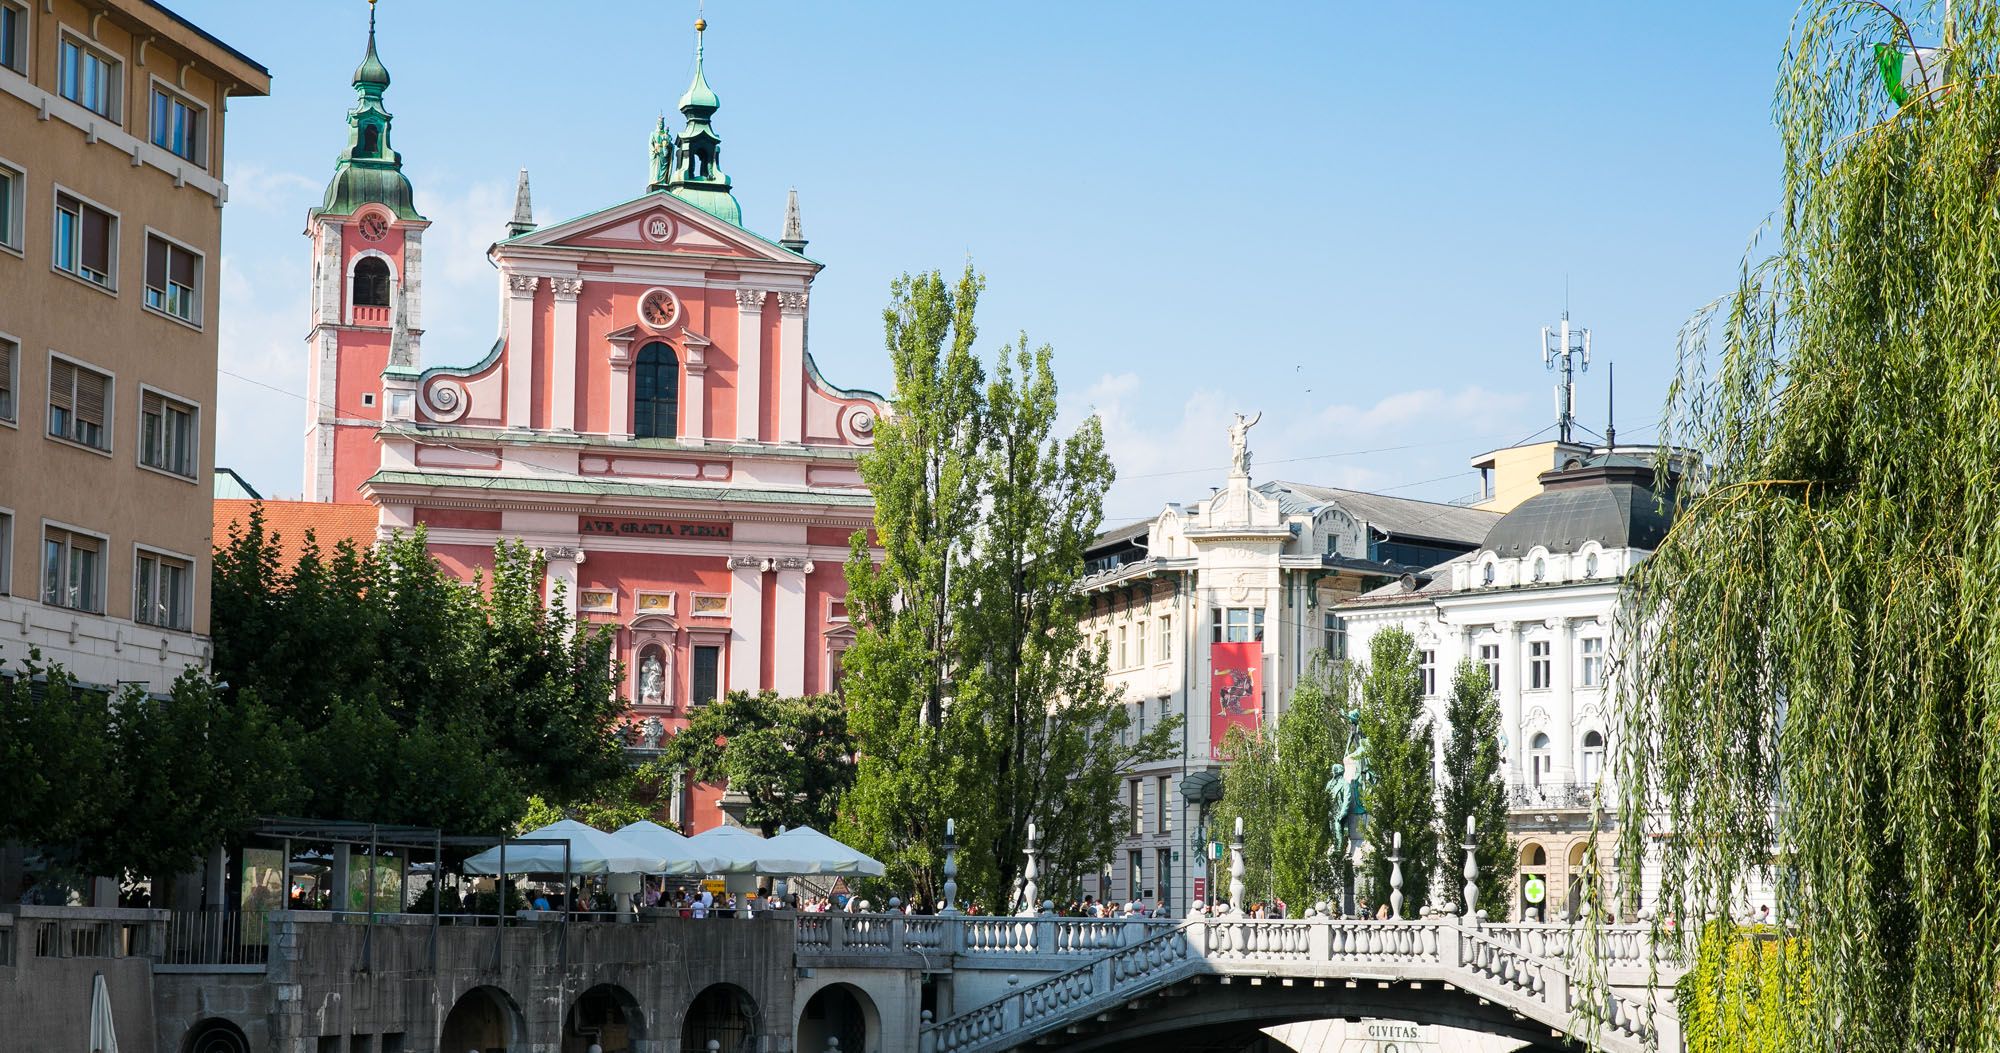 Featured image for “14 Best Things to Do in Ljubljana, Slovenia”